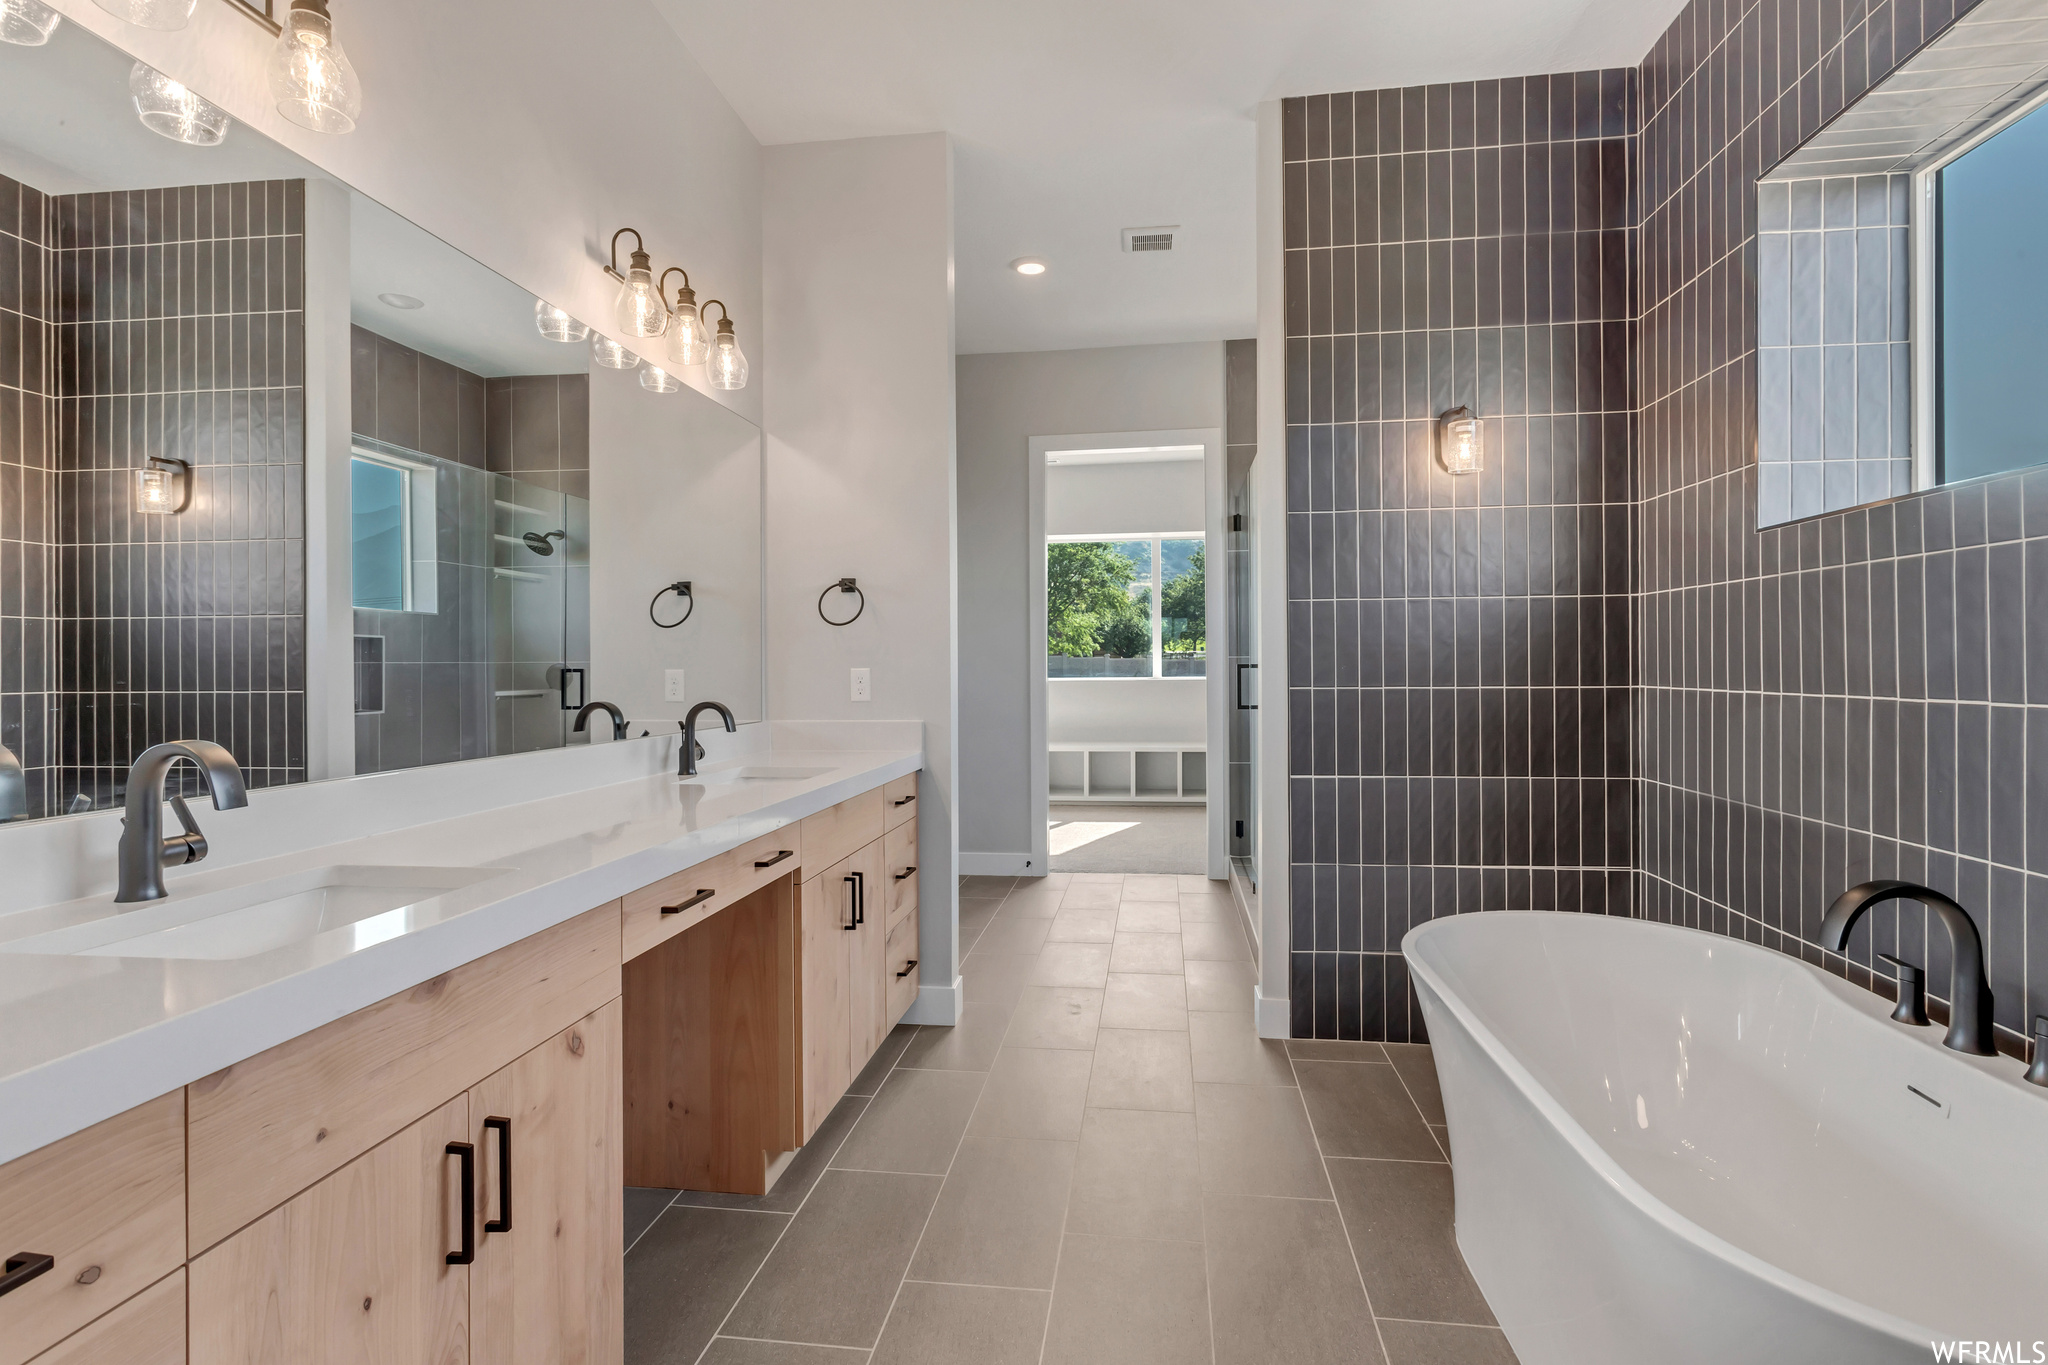 Primary suite bath, this owner chose to extend the tile surrounding the tub all the way to the ceiling